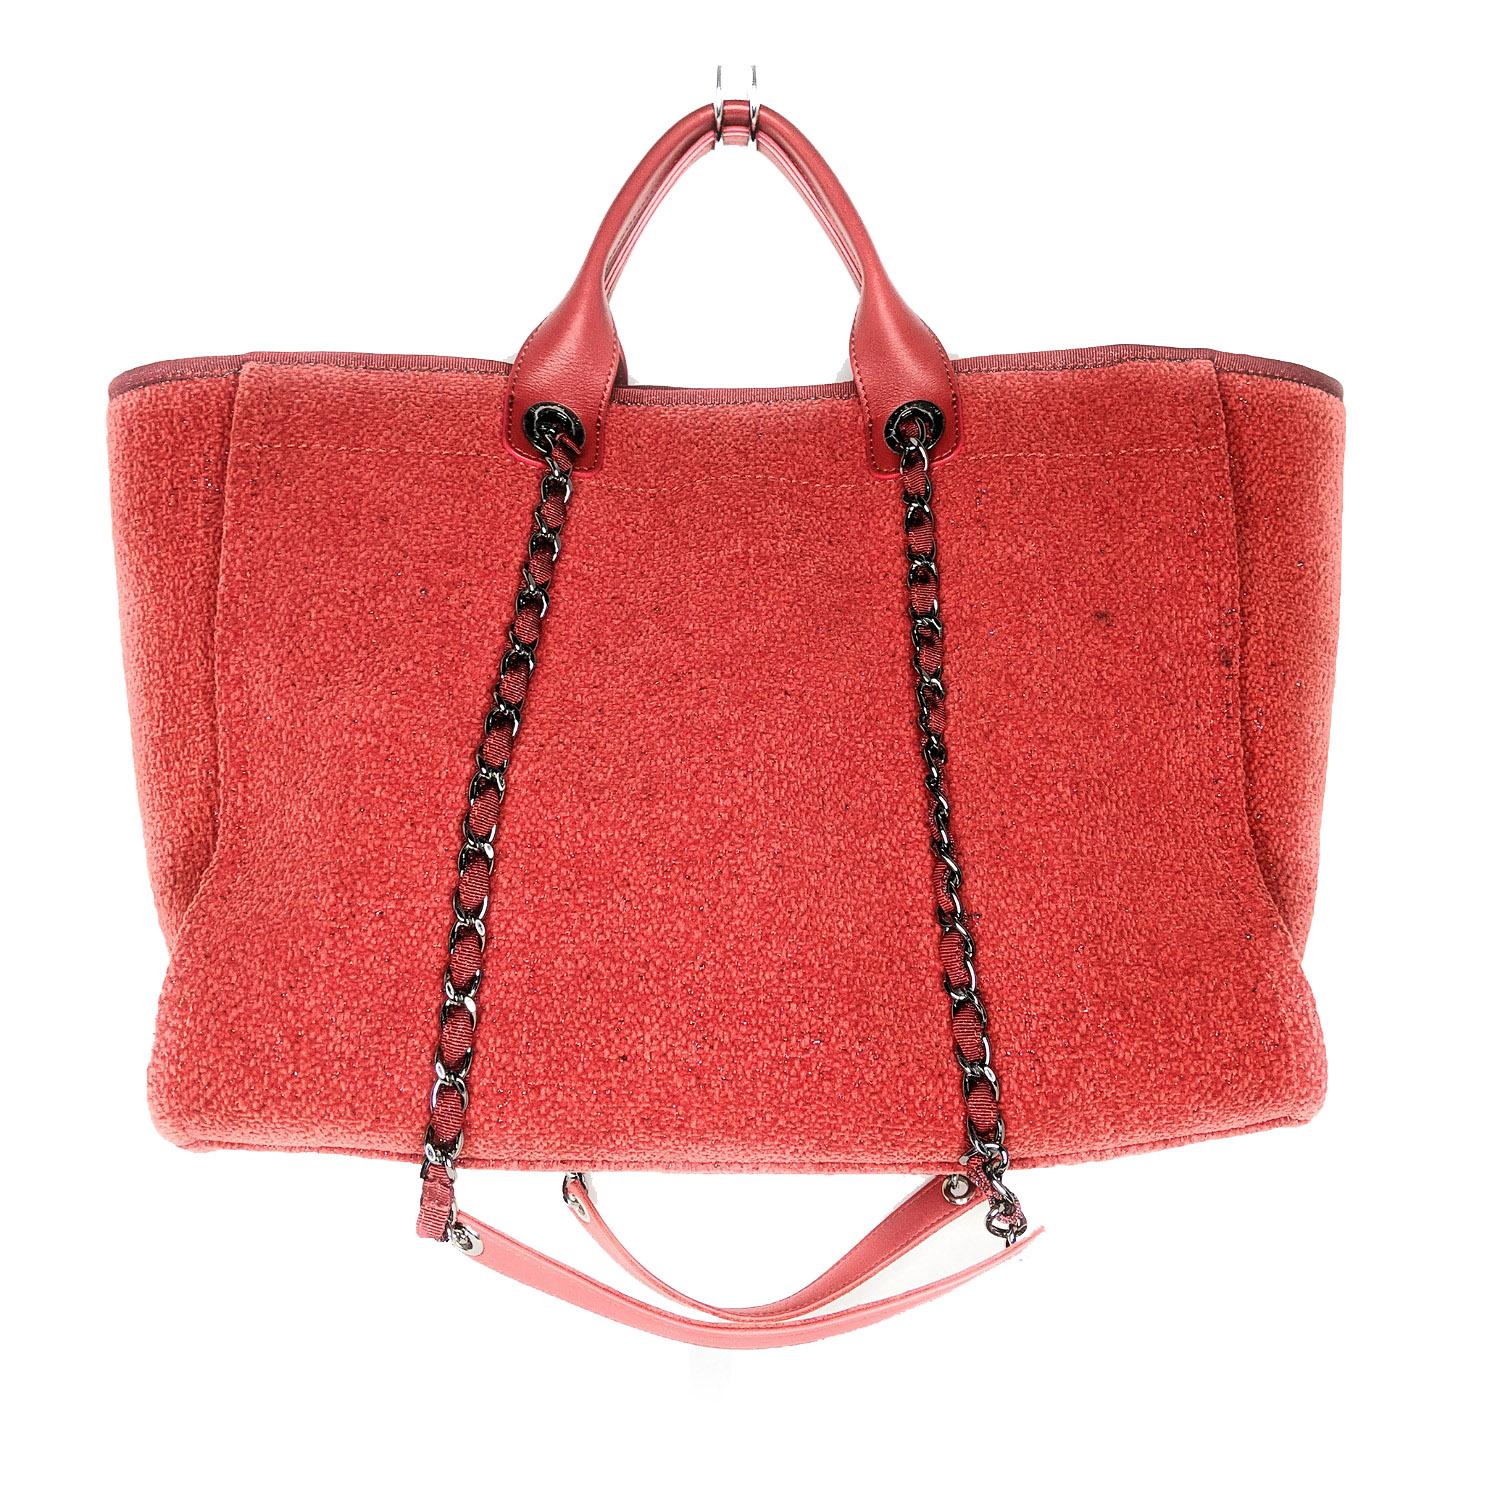 This lovely tote is crafted of fine red fabric with a dark silver Chanel advertisement logo. The shoulder bag features rolled red leather top handles and polished ruthenium chain-link fabric threaded shoulder straps. The broad top is open to a red